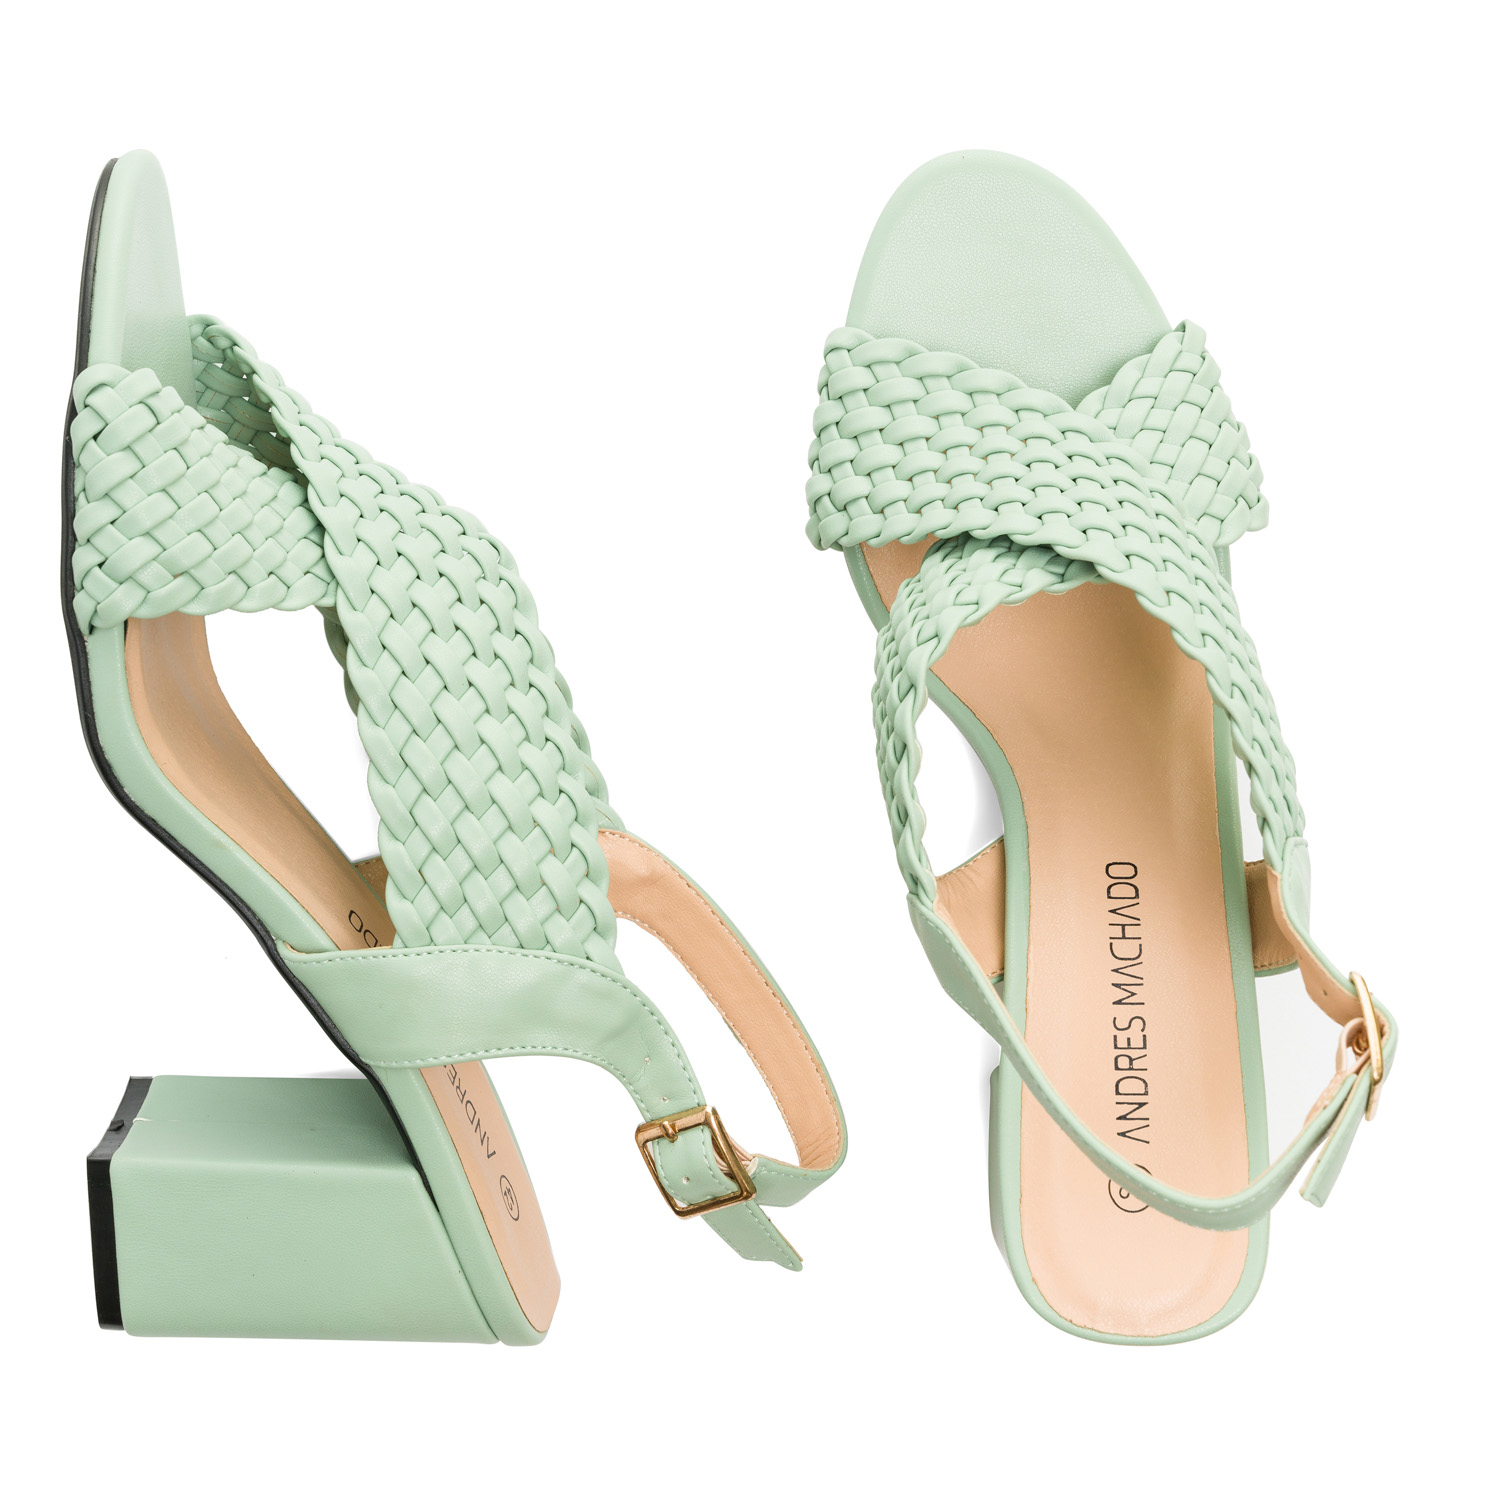 Braided mint faux leather sandals 